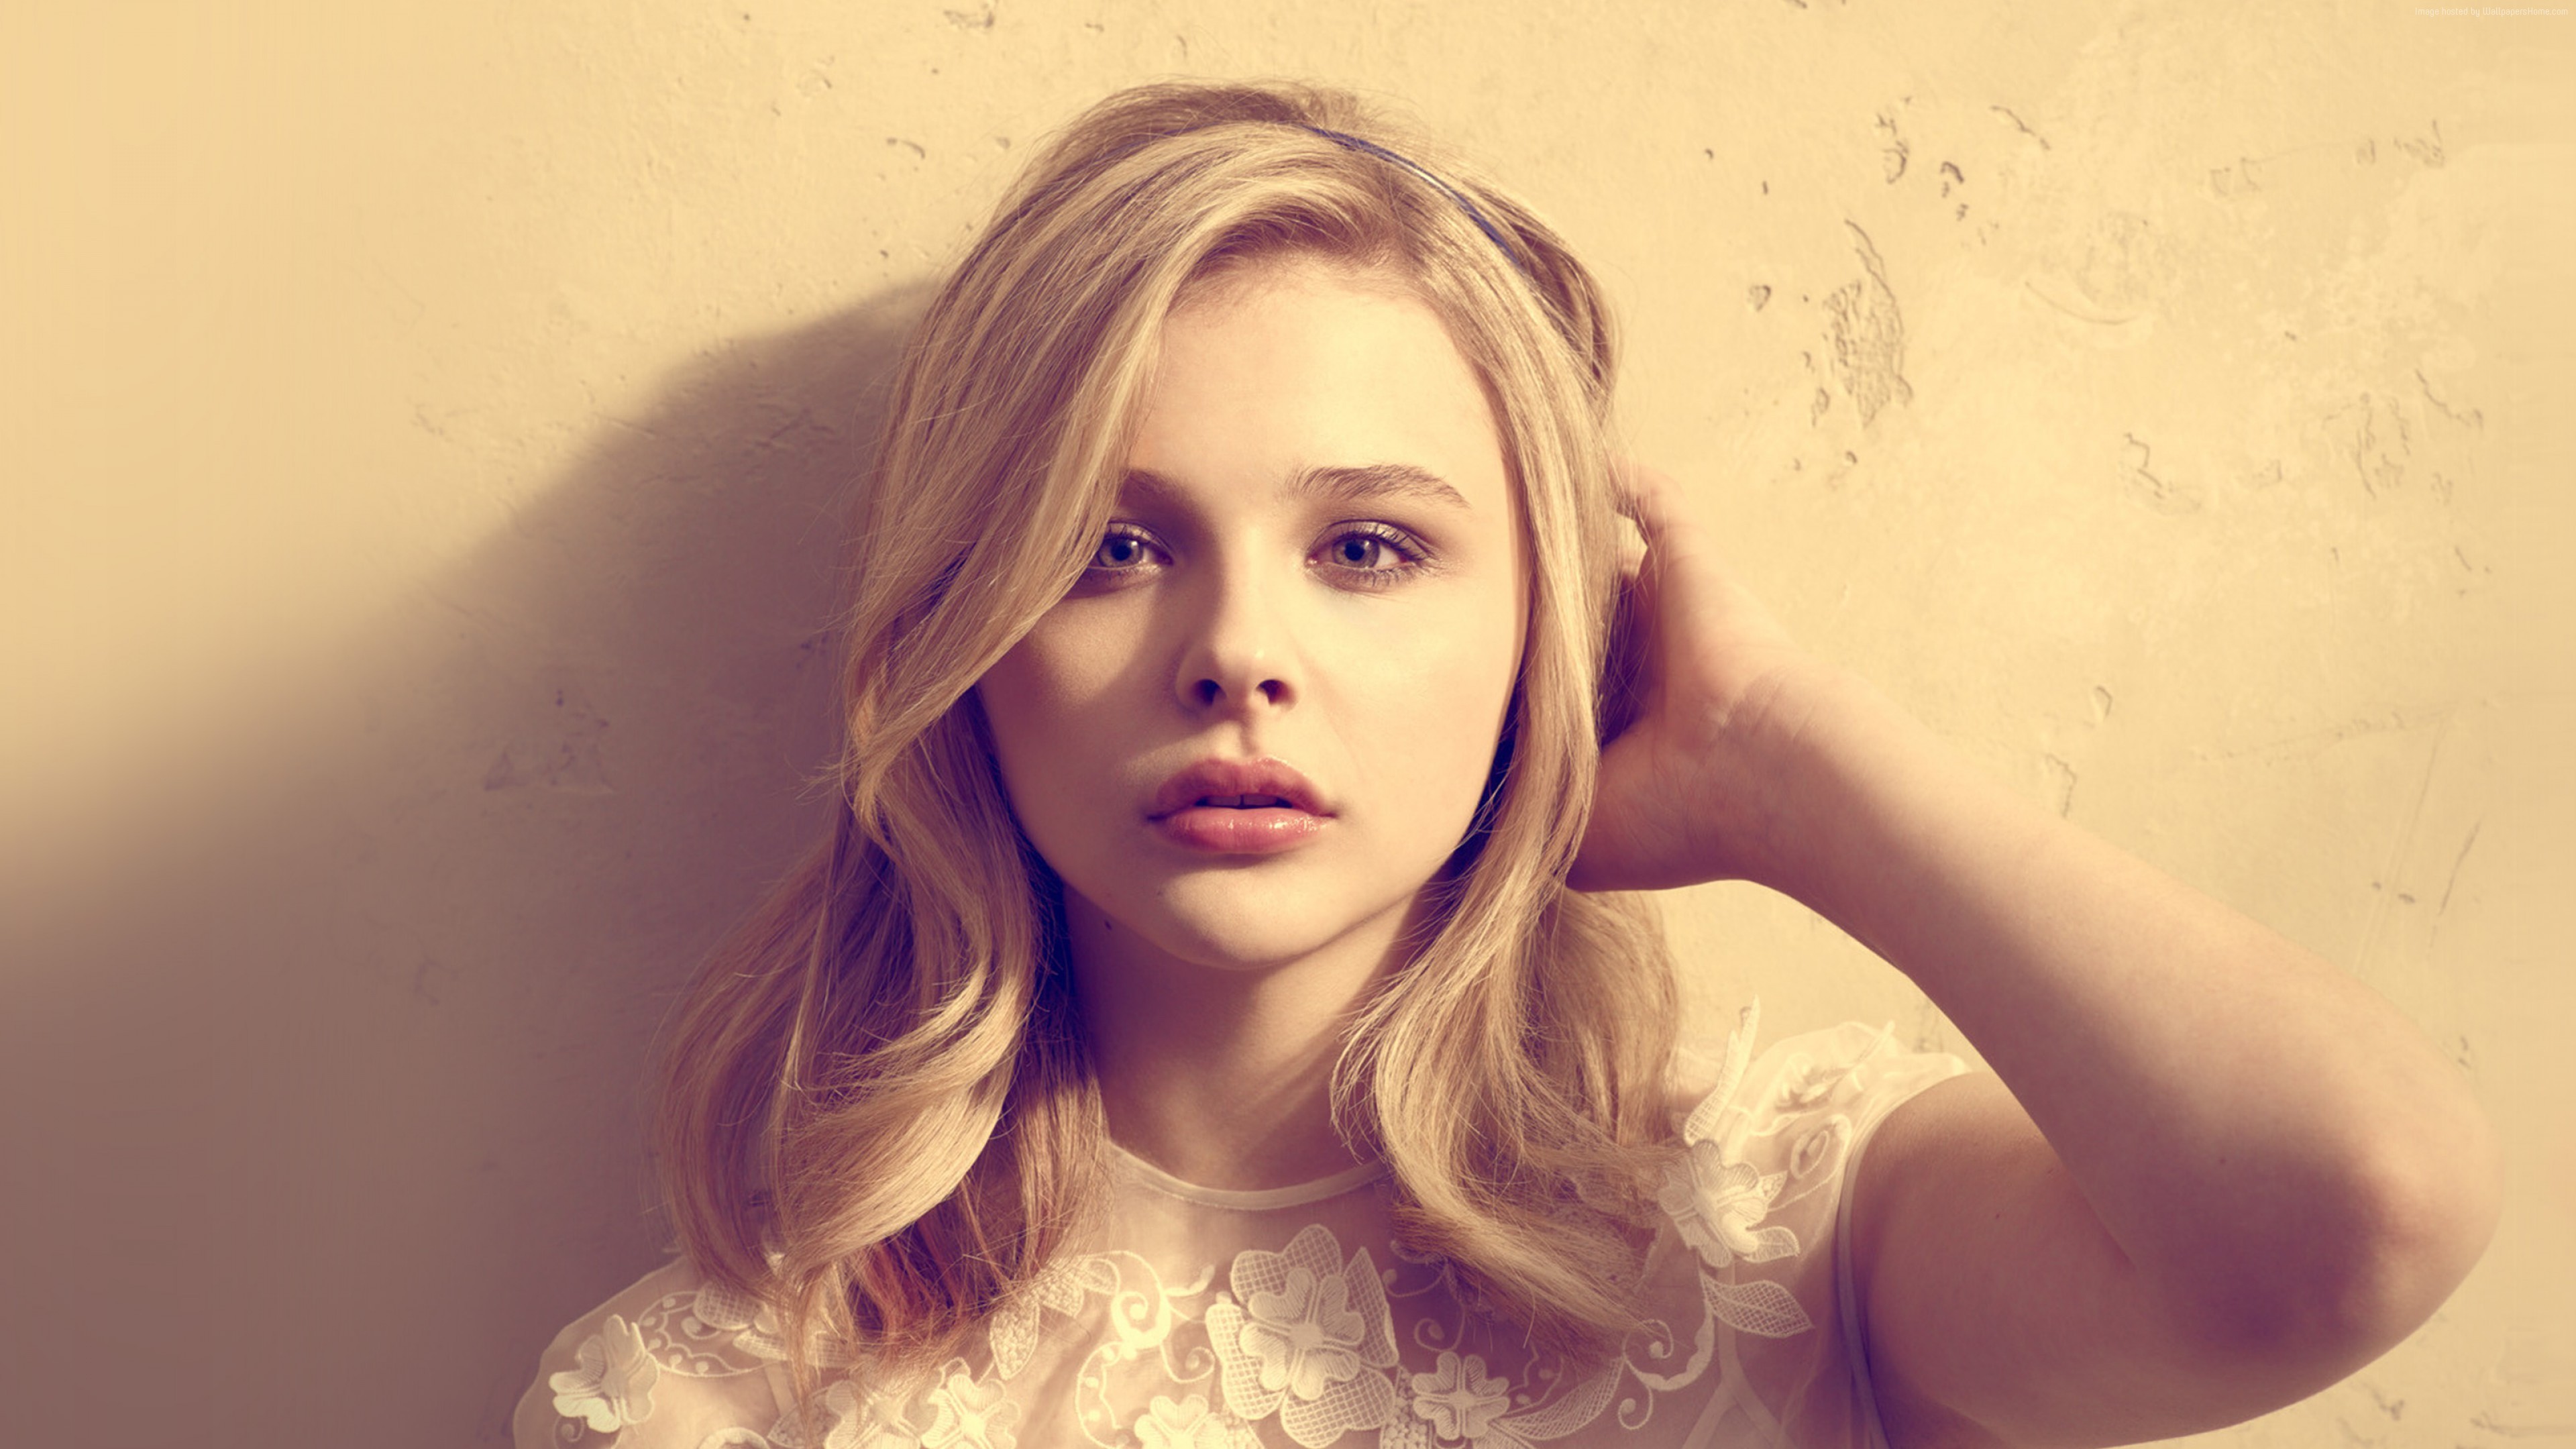 Wallpaper, face, white, blonde, long hair, celebrity, actress, mouth, Chlo Grace Moretz, Person, skin, head, color, girl, beauty, smile, eye, woman, hand, lady, photograph, blond, hairstyle, portrait photography, photo shoot, brown